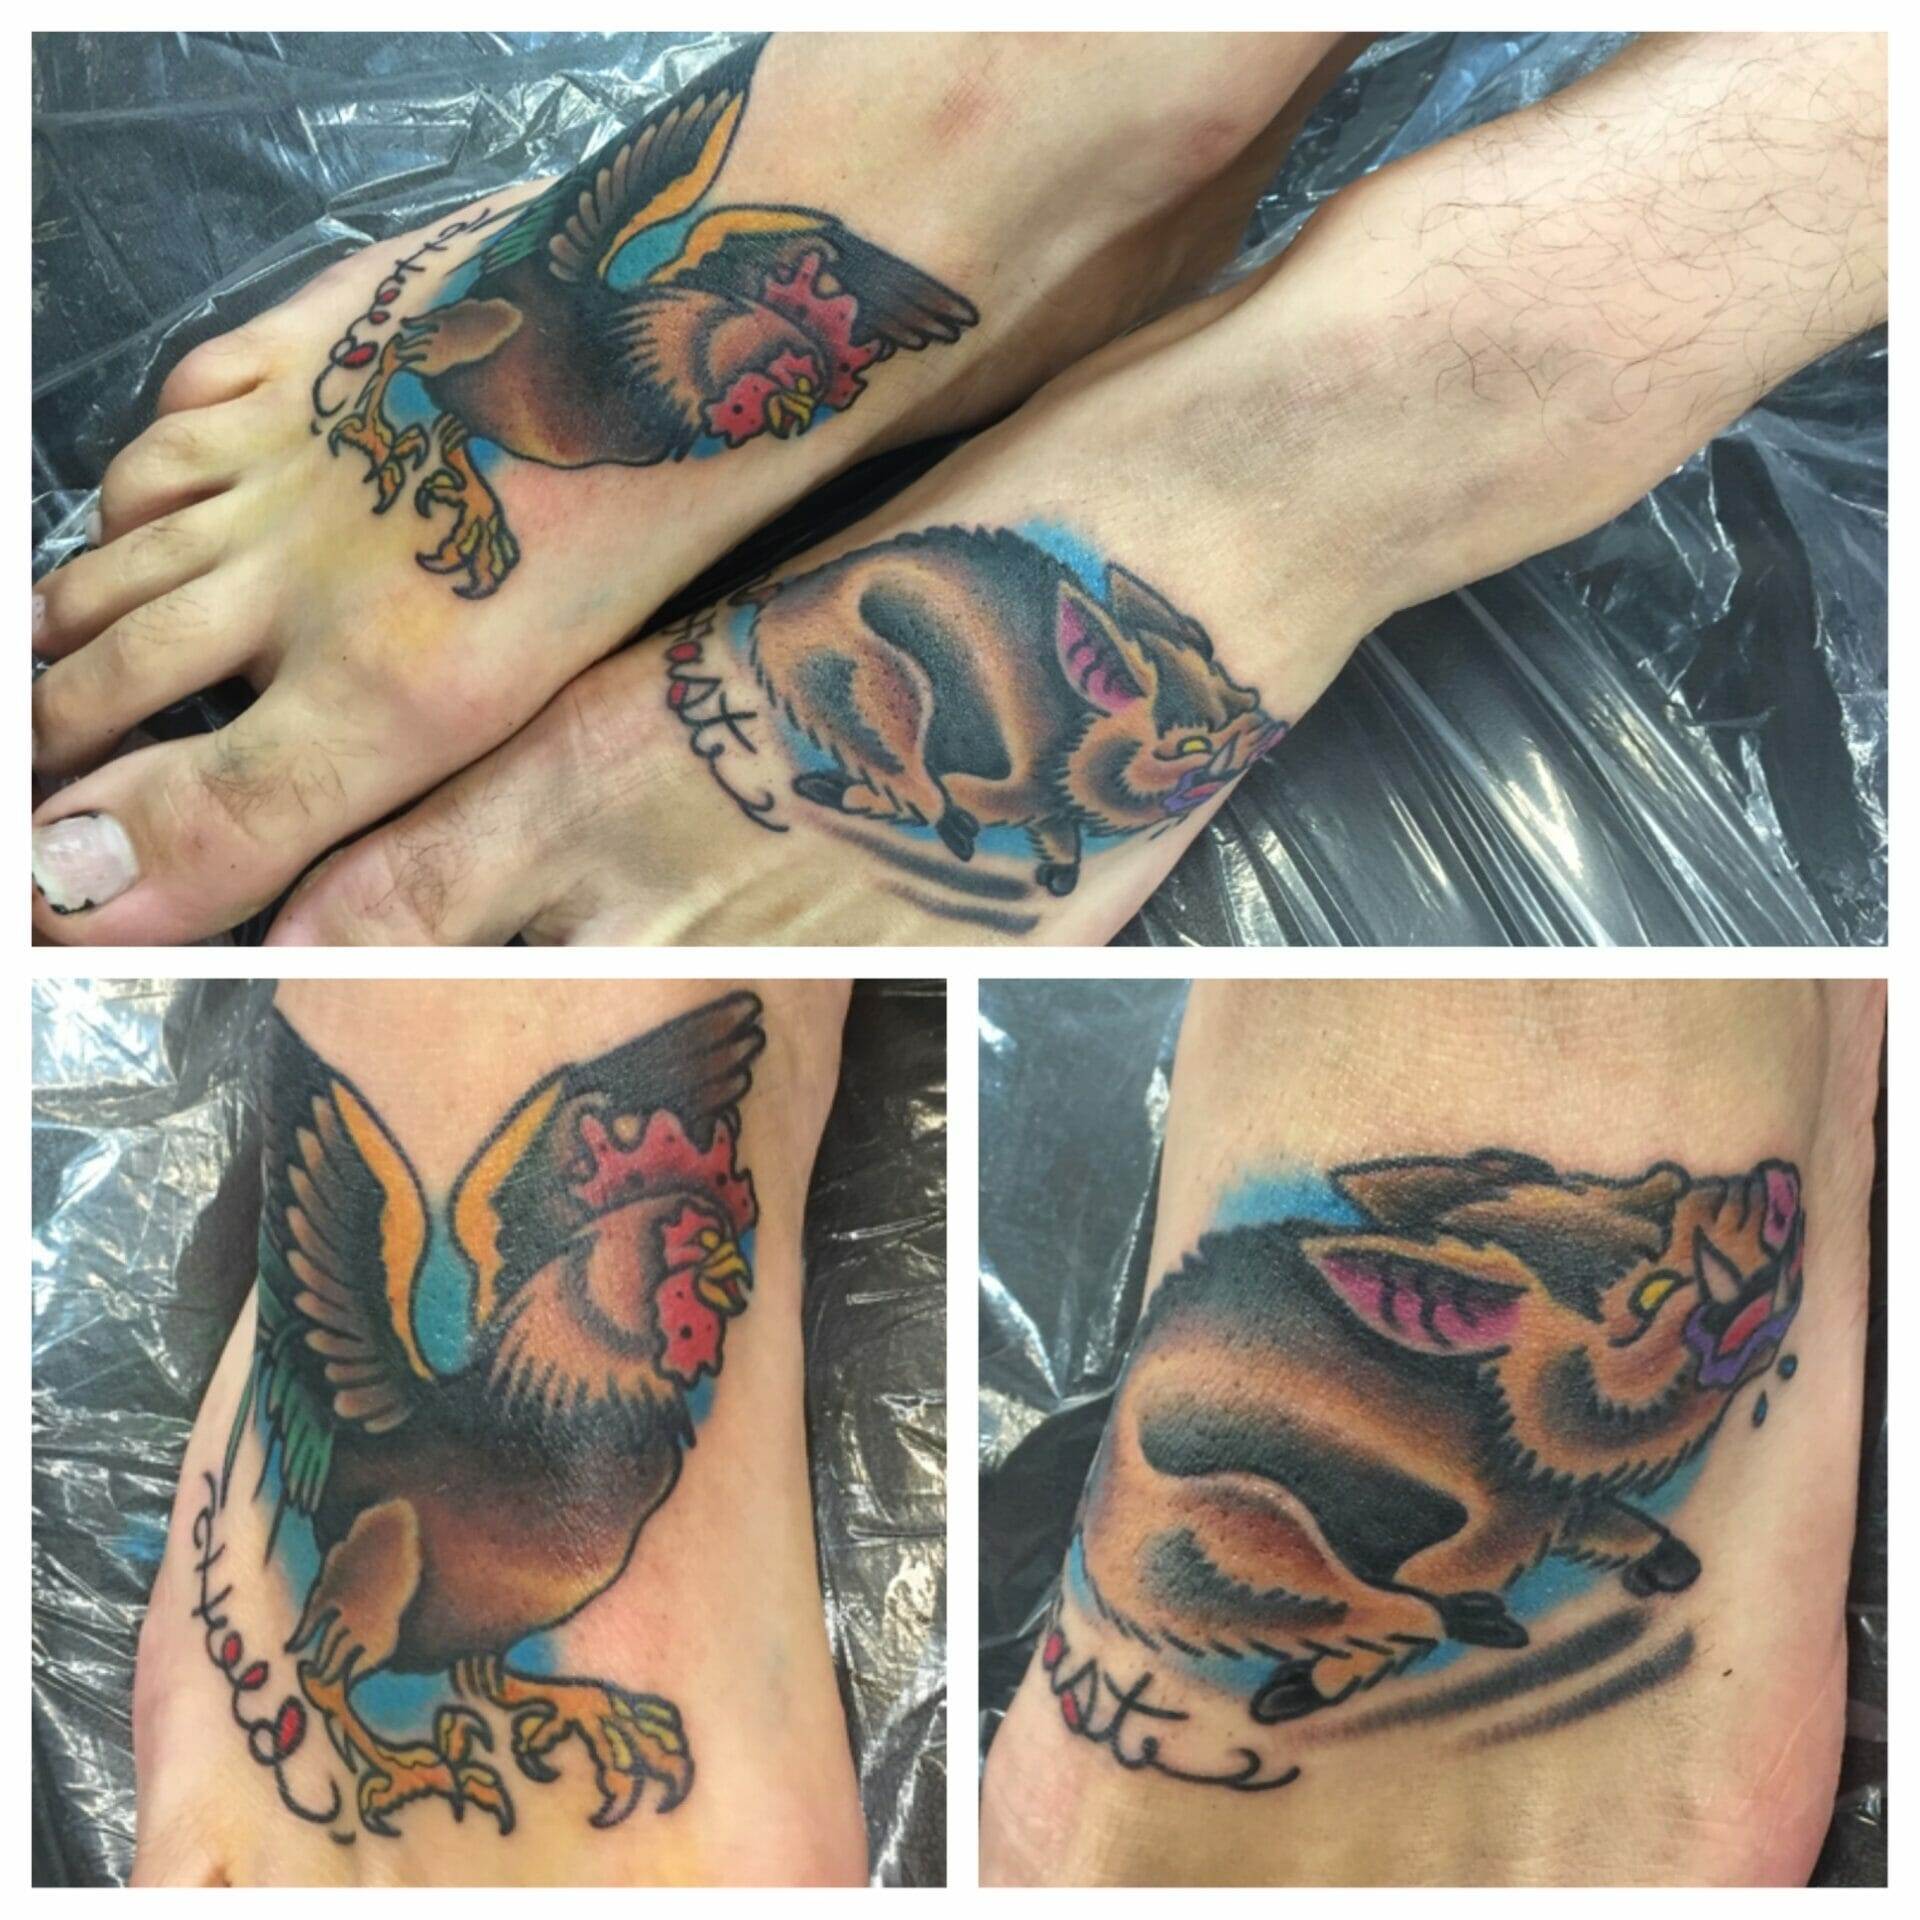 Pig Head with cleaver | Kyle Sajban Tattoos